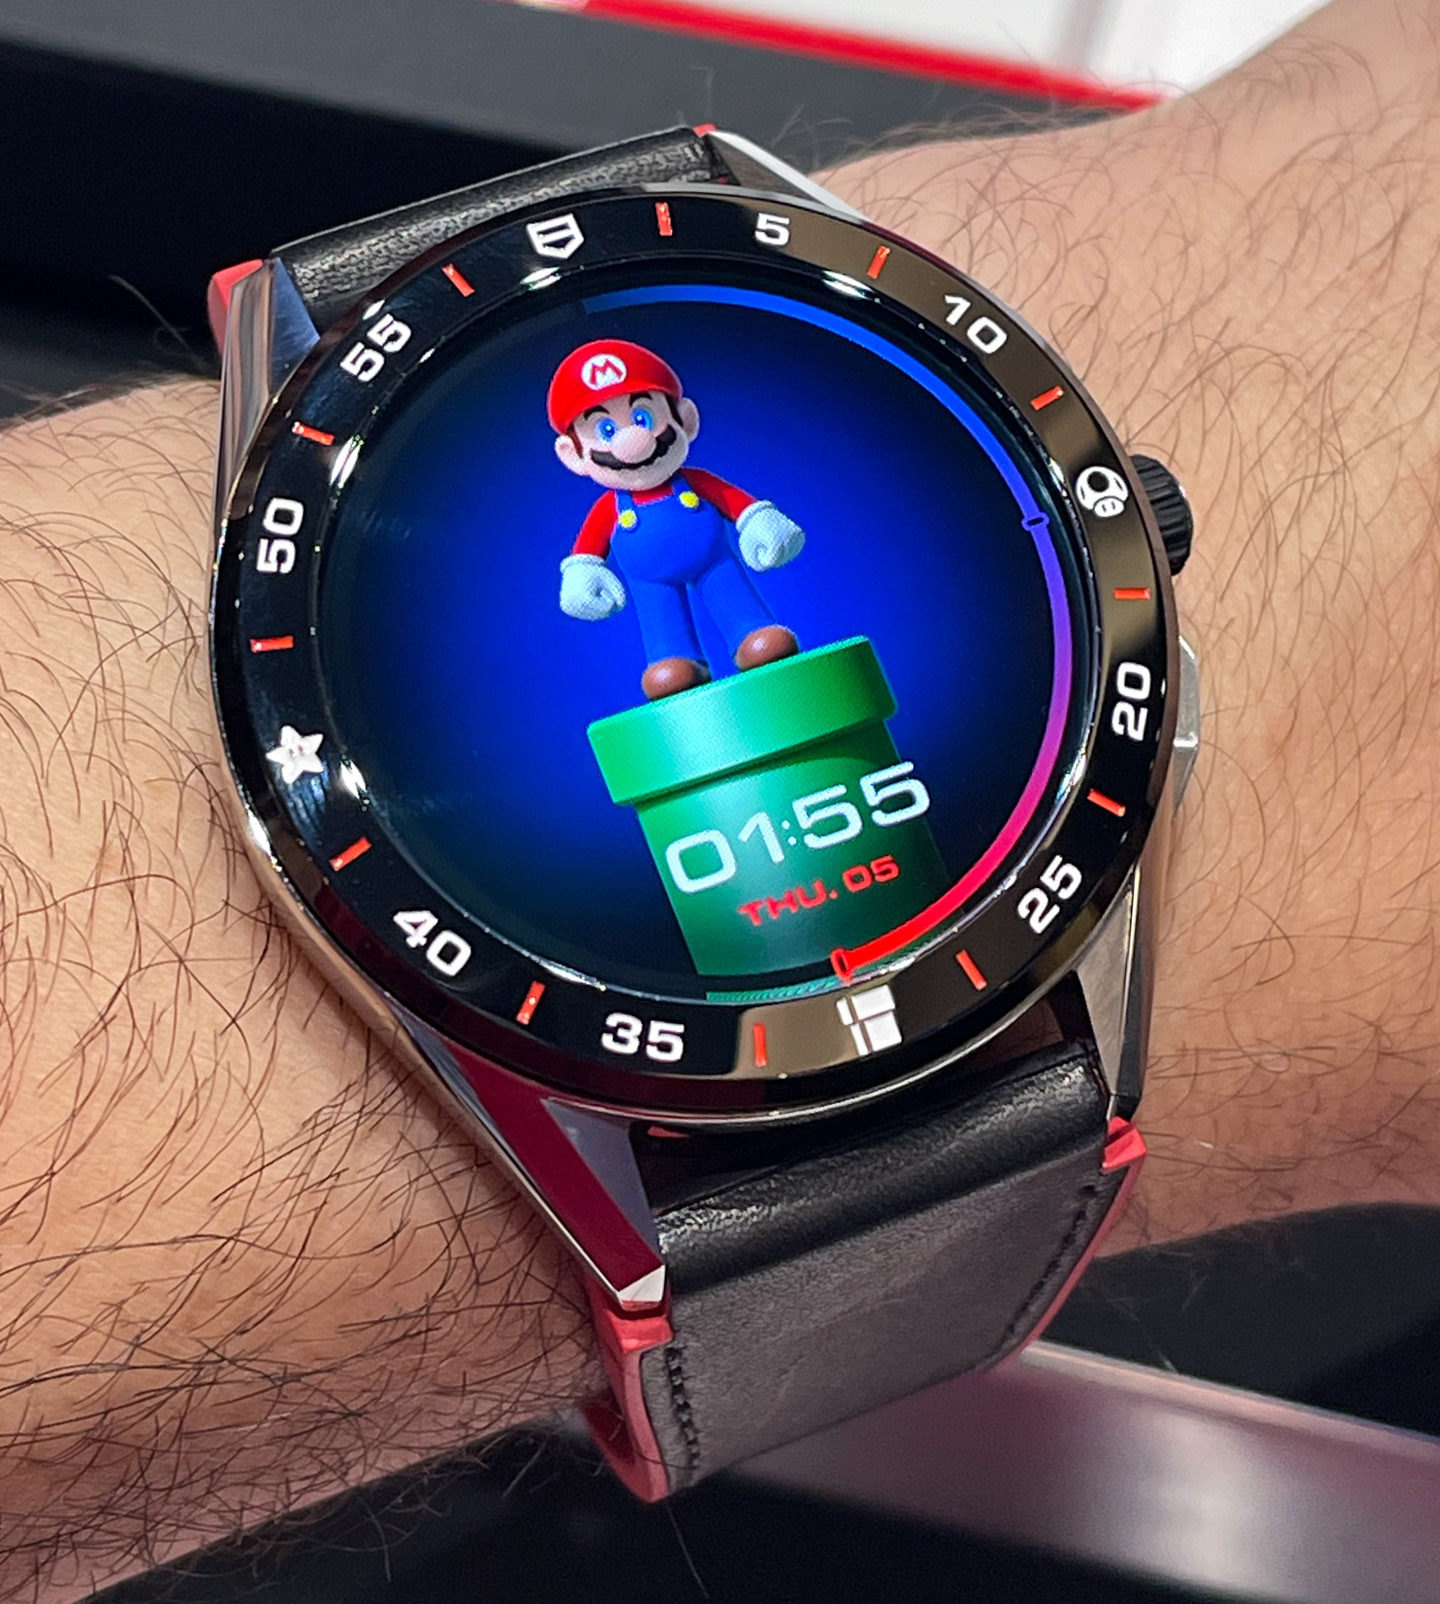 Is the TAG Heuer Super Mario smartwatch a good value?